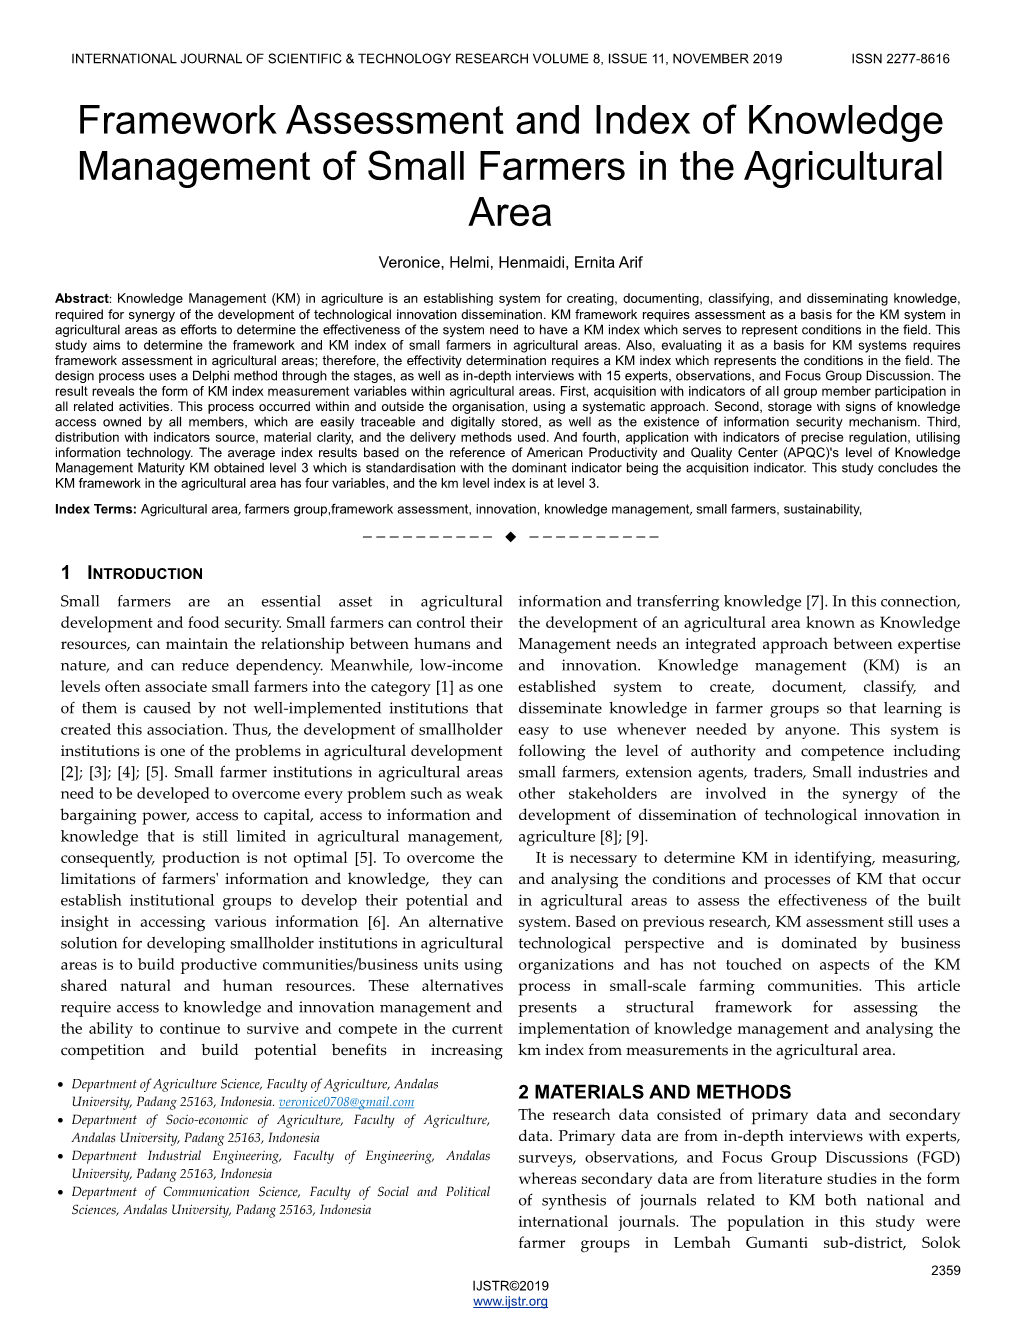 Framework Assessment and Index of Knowledge Management of Small Farmers in the Agricultural Area